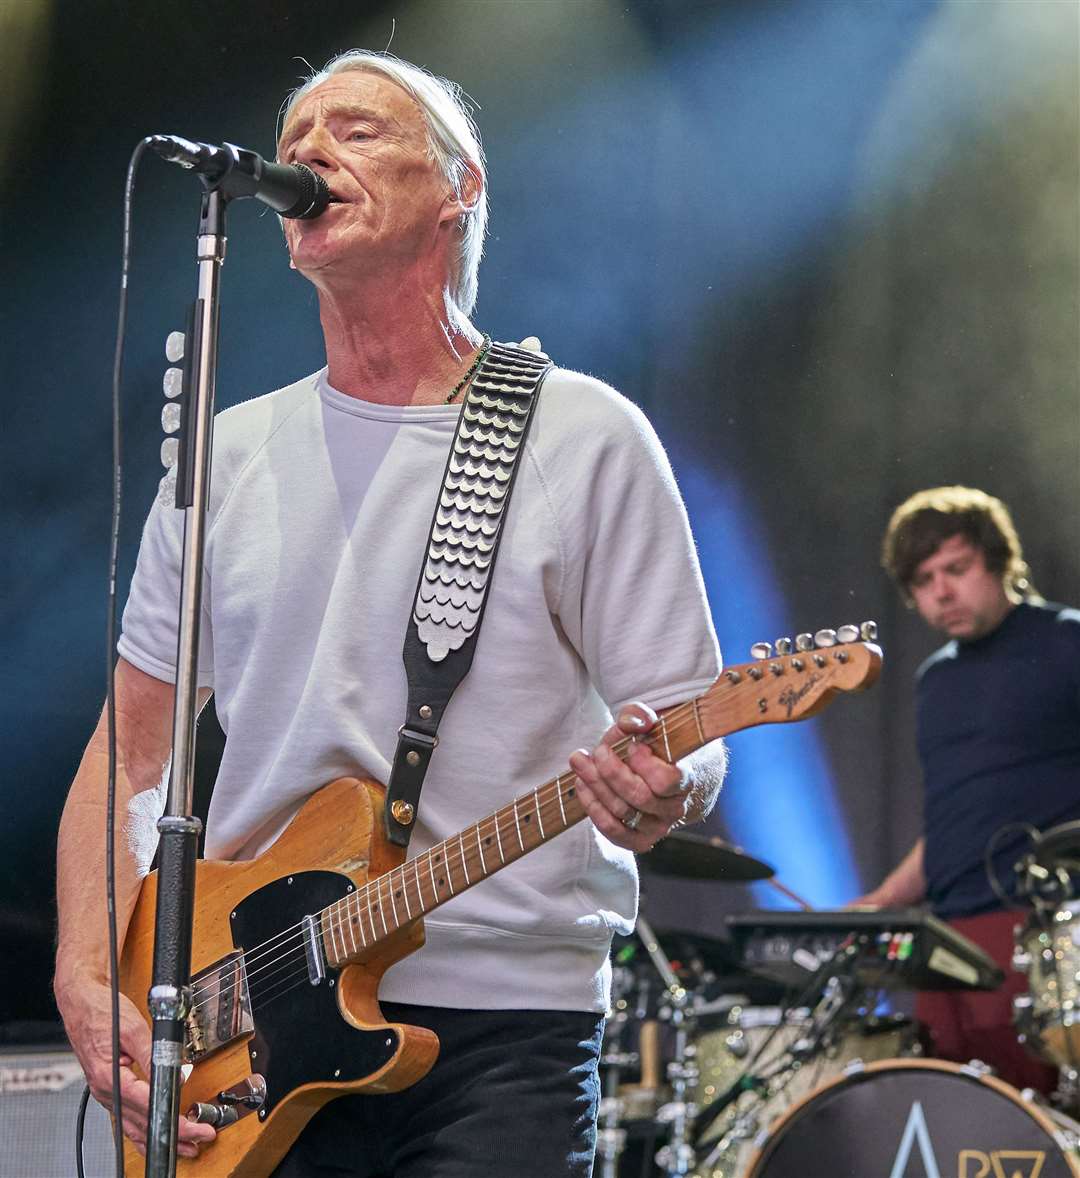 Paul Weller performing at Forestry England’s ‘Forest Live’ concert series at High Lodge, Thetford Forest. Pictures: Lee Blanchflower